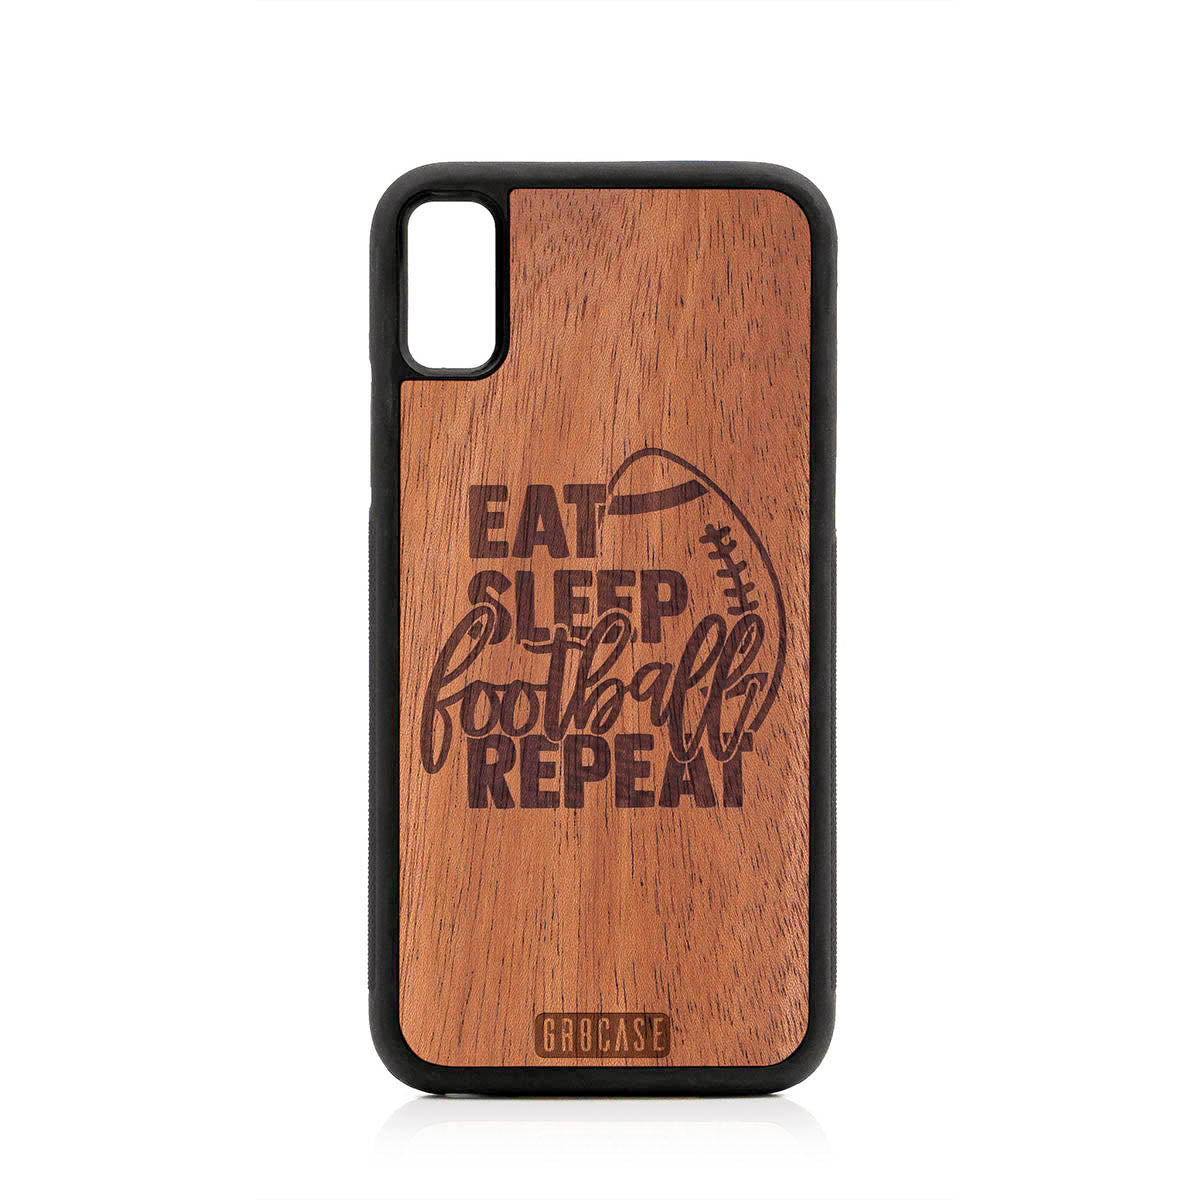 Eat Sleep Football Repeat Design Wood Case For iPhone XS Max